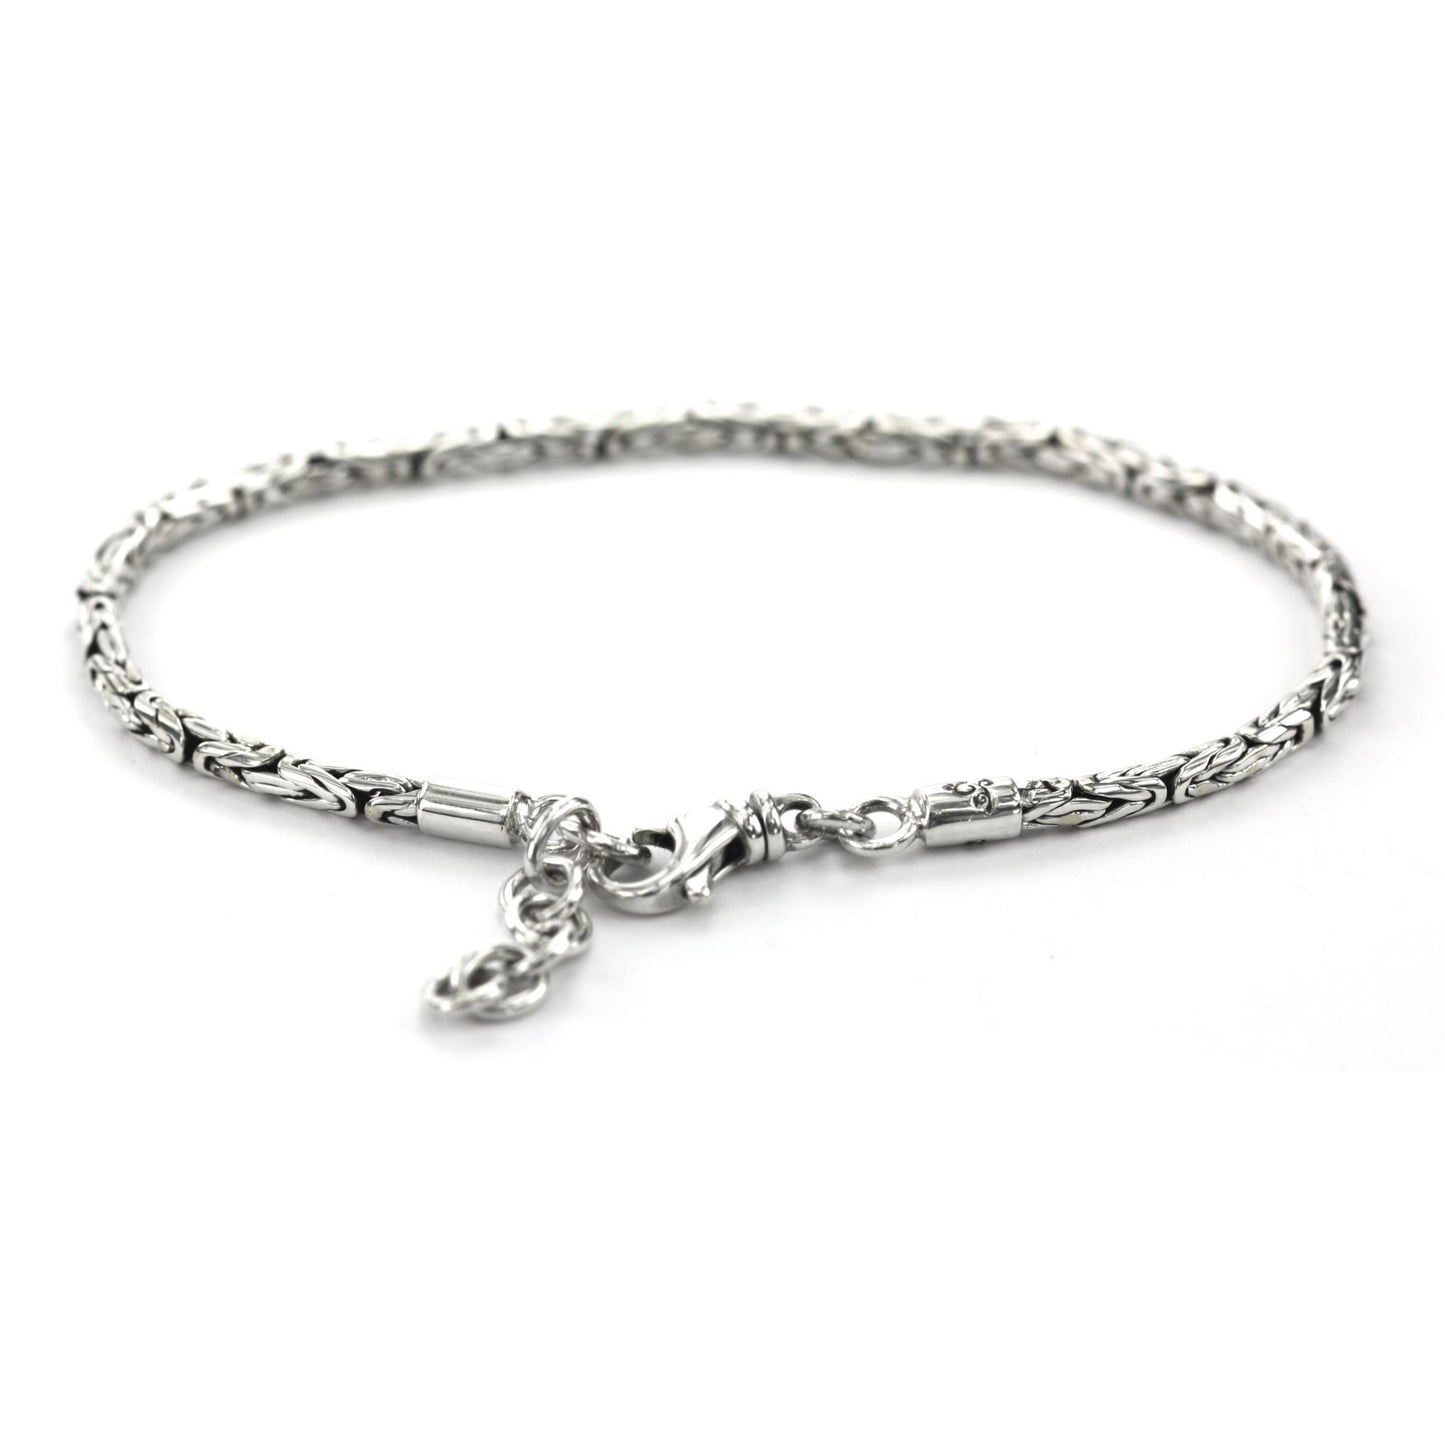 Silver byzantine chain bracelet with lobster clasp.